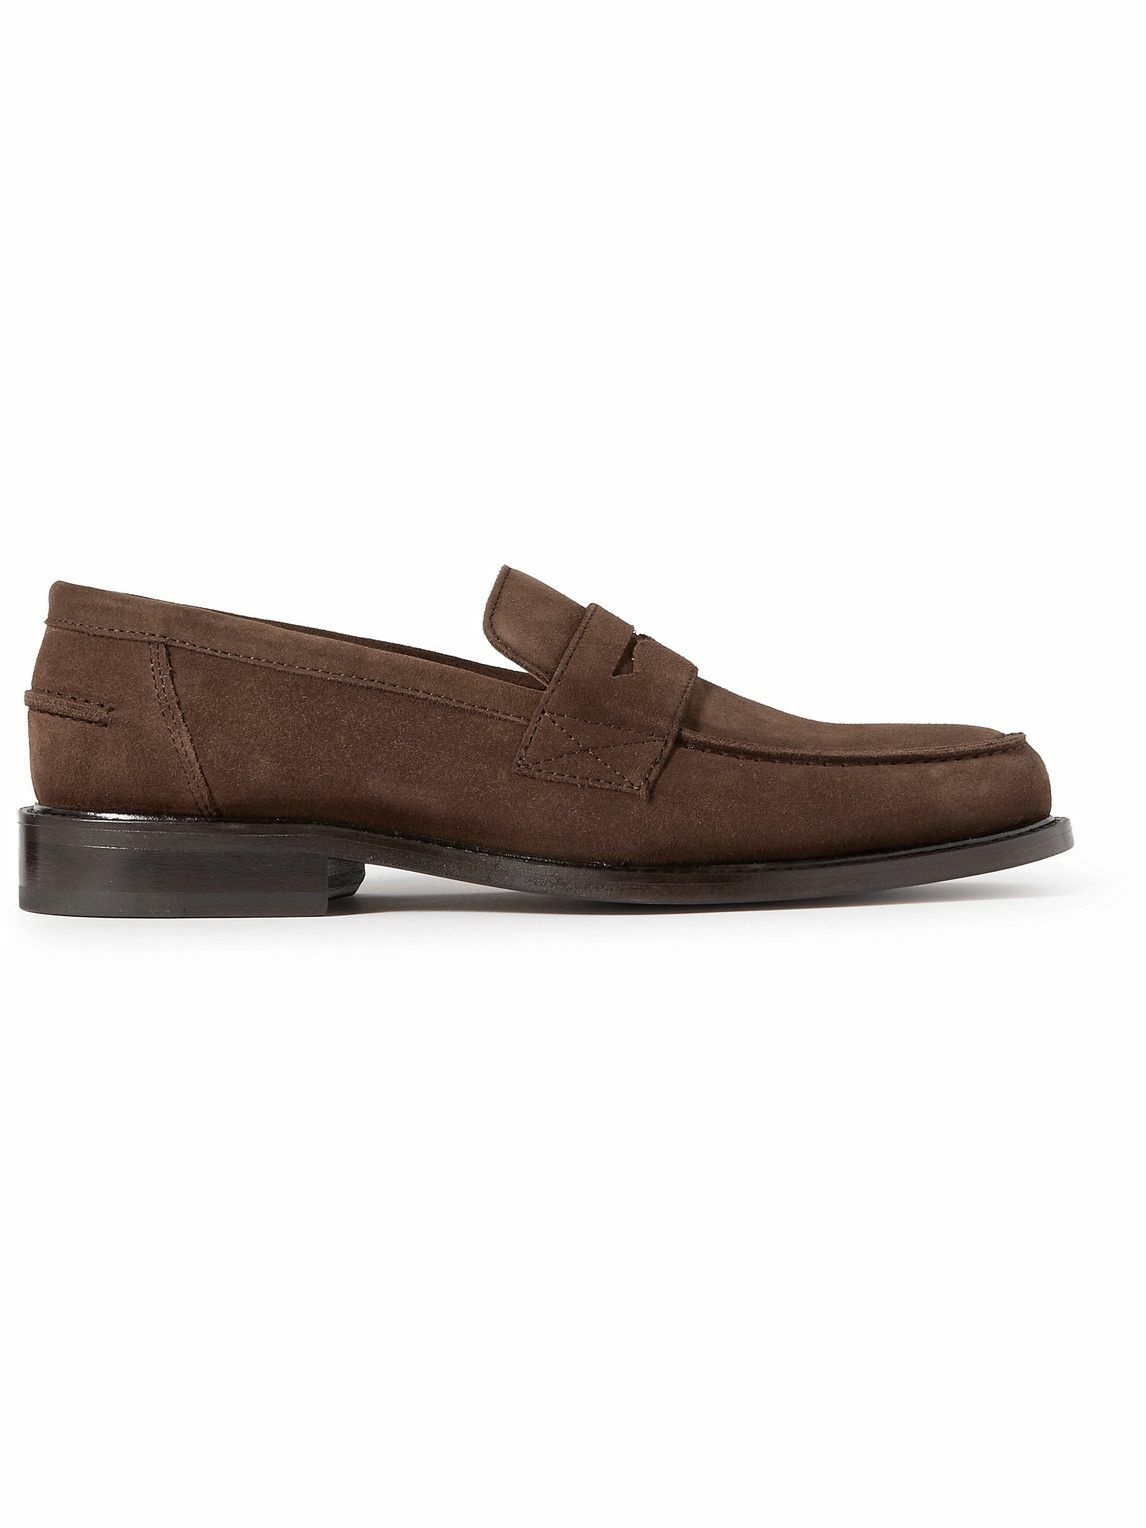 Mr P. - Suede Loafers - Brown Mr P.